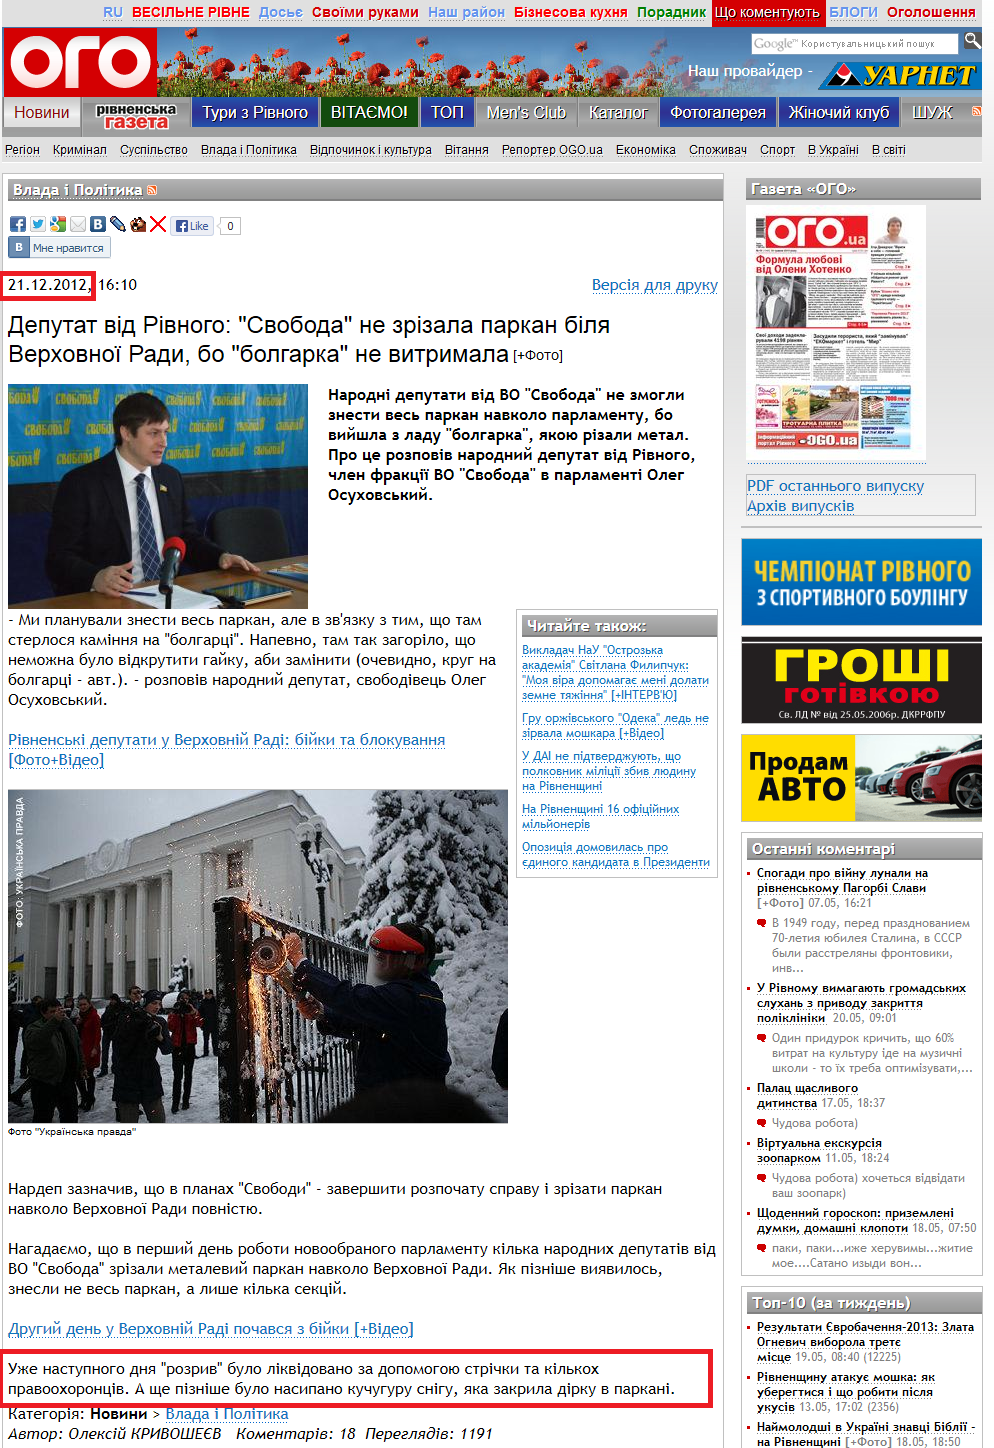 http://www.ogo.ua/articles/view/2012-12-21/37018.html